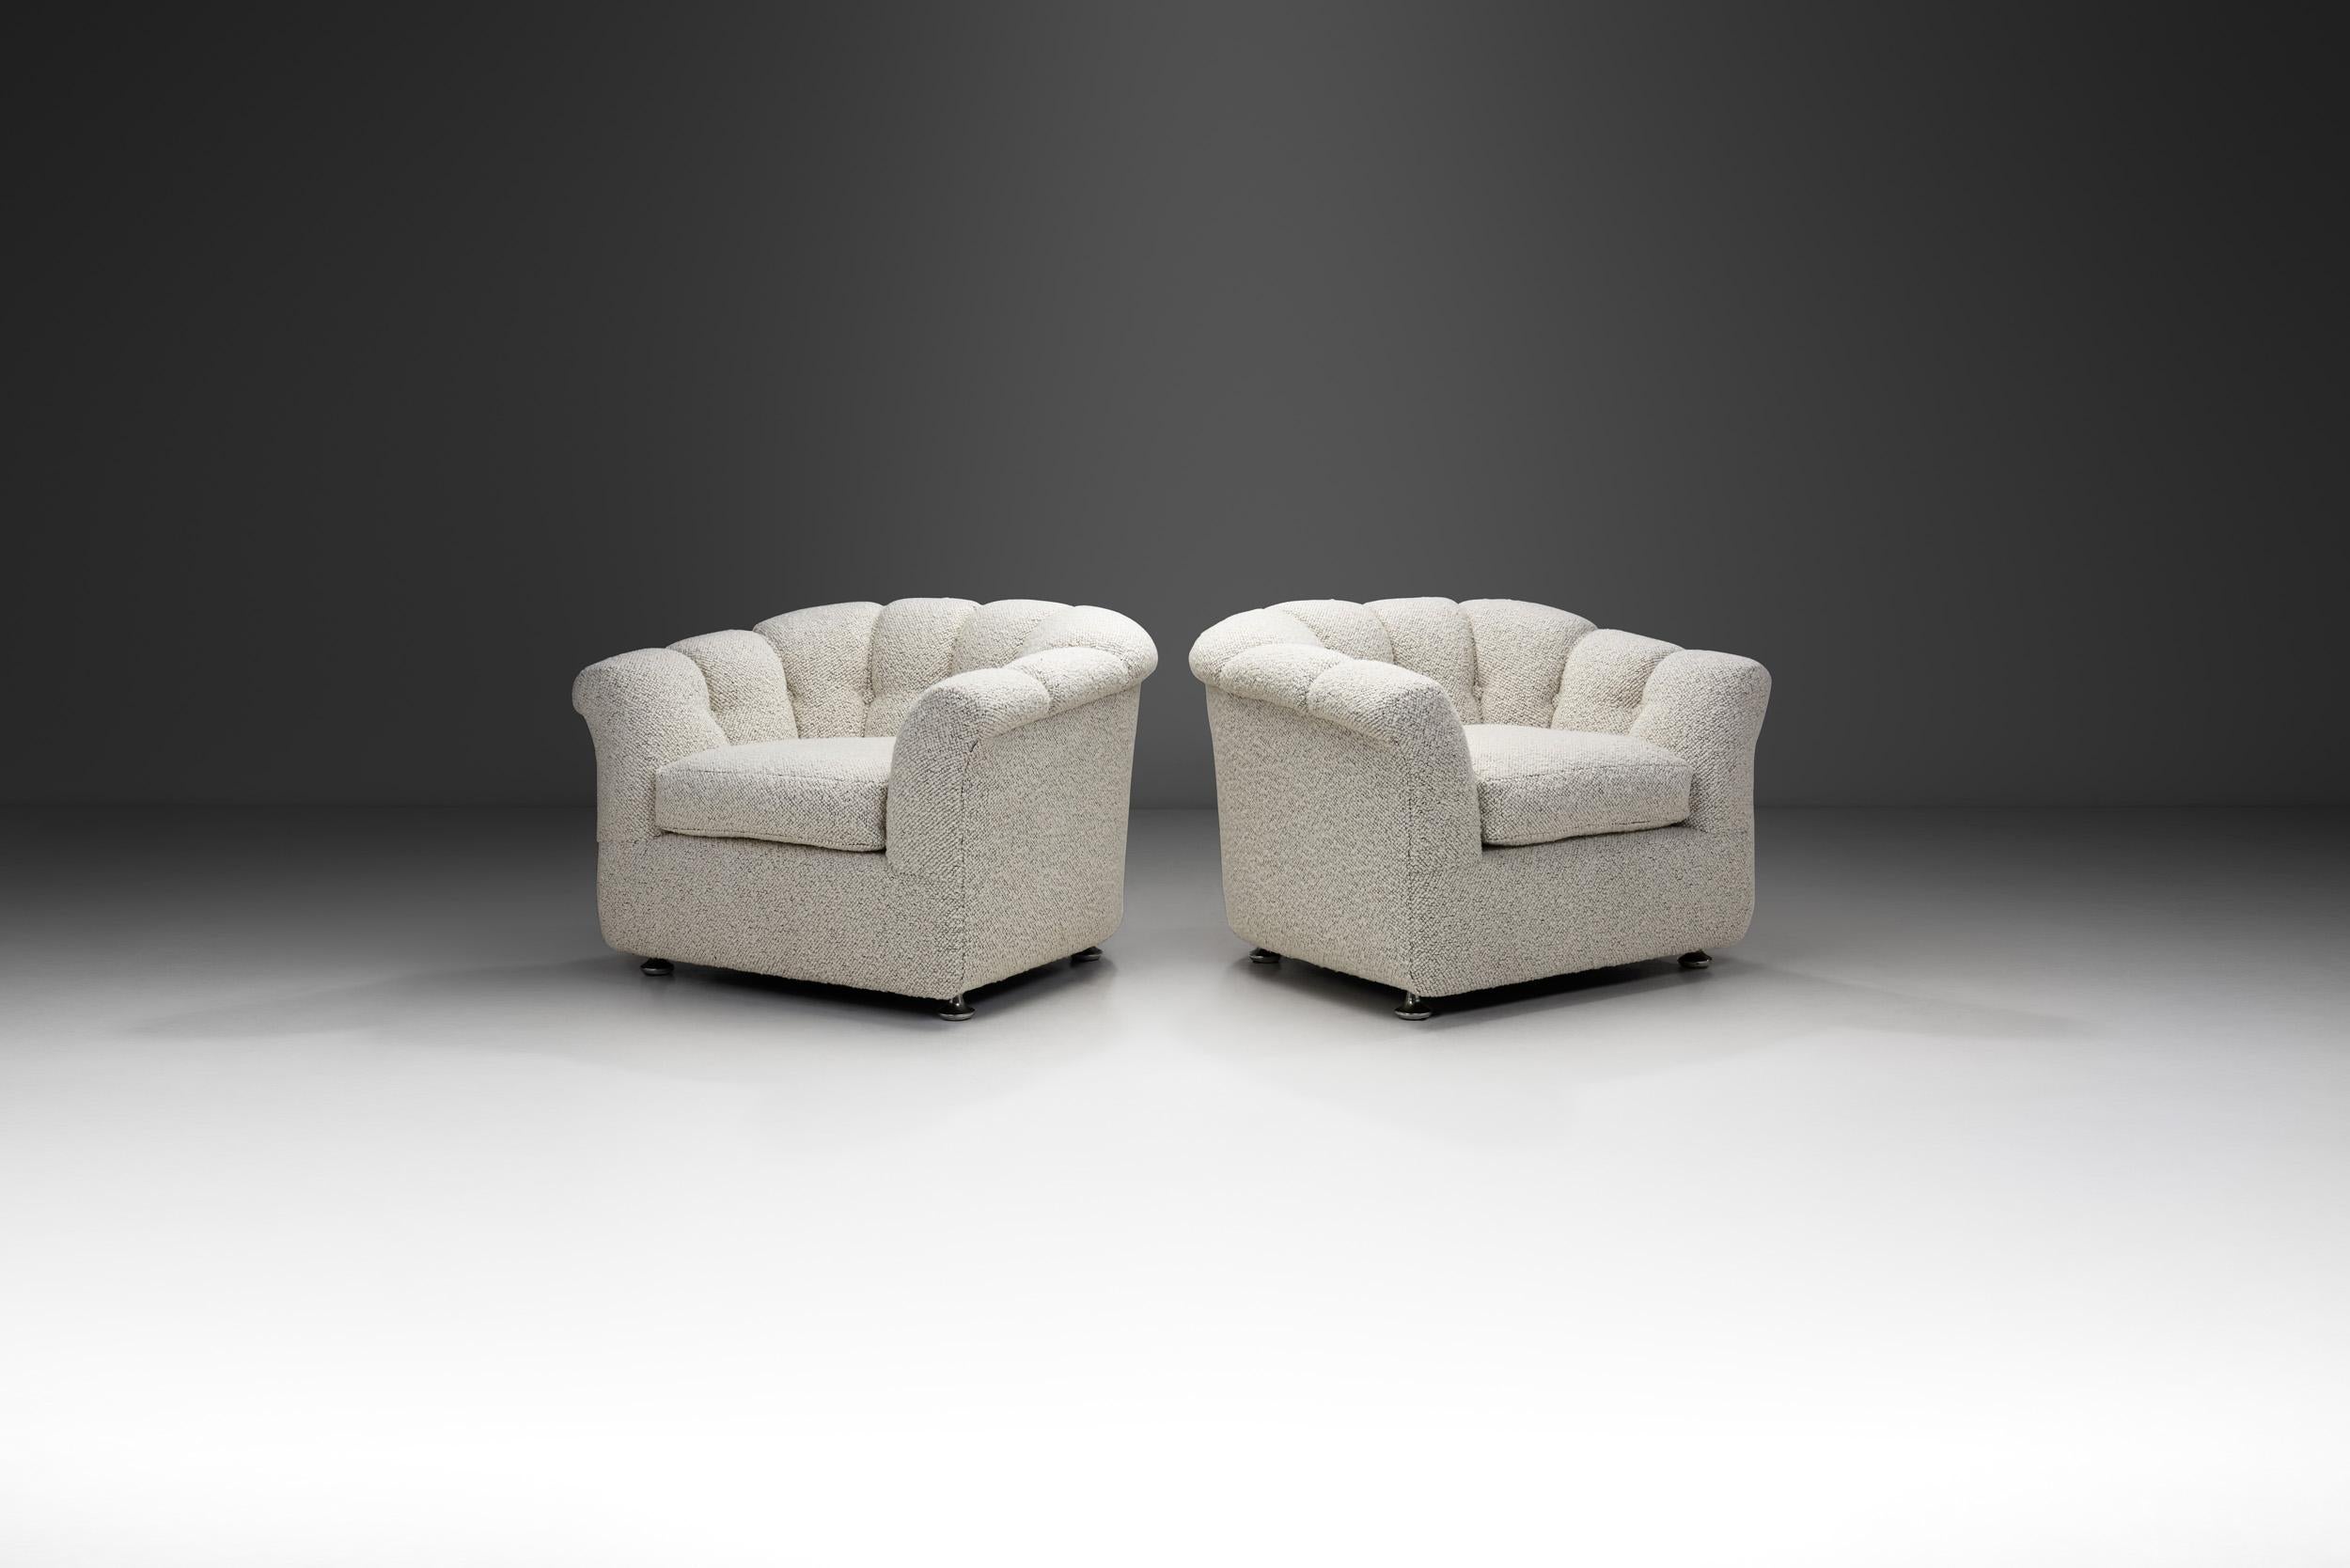 This pair of club chairs from the 1970s stands as a captivating blend of timeless design influences. Fully upholstered in a luxurious white bouclé fabric, these chairs epitomize the essence of comfort and style. Their scalloped bodies exude a